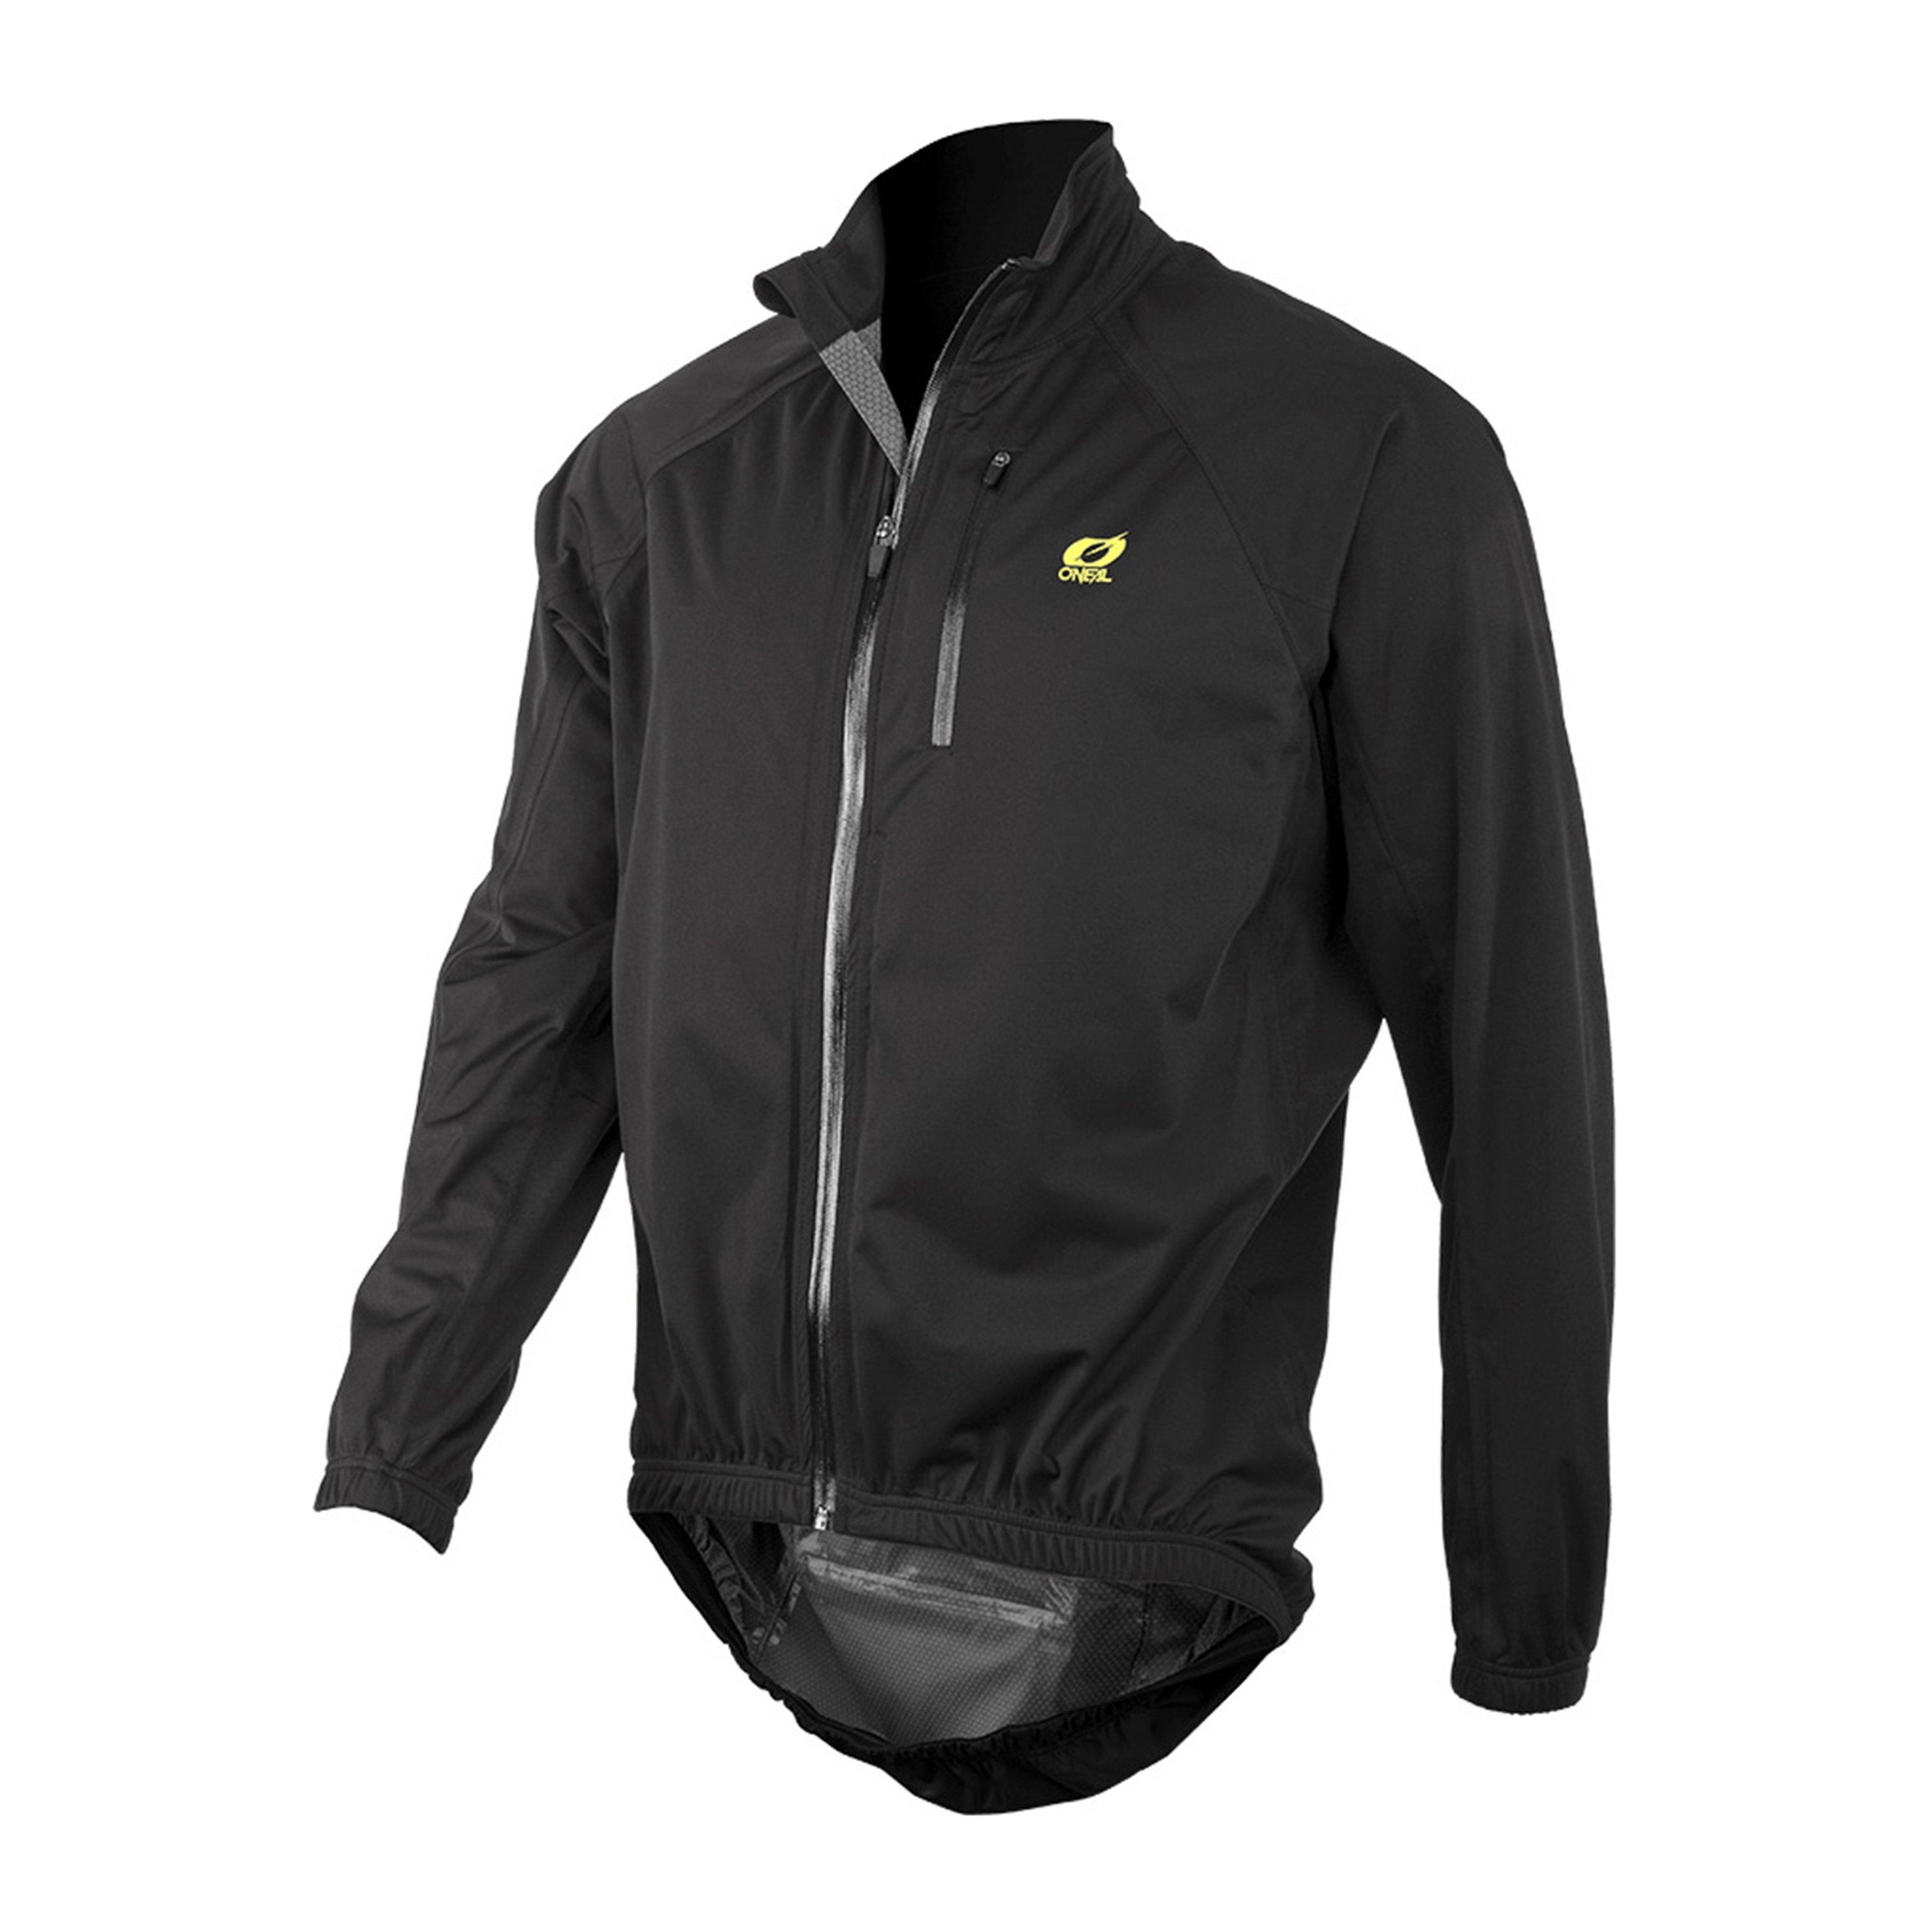 O'Neal Monsoon Stretch Jacket Review